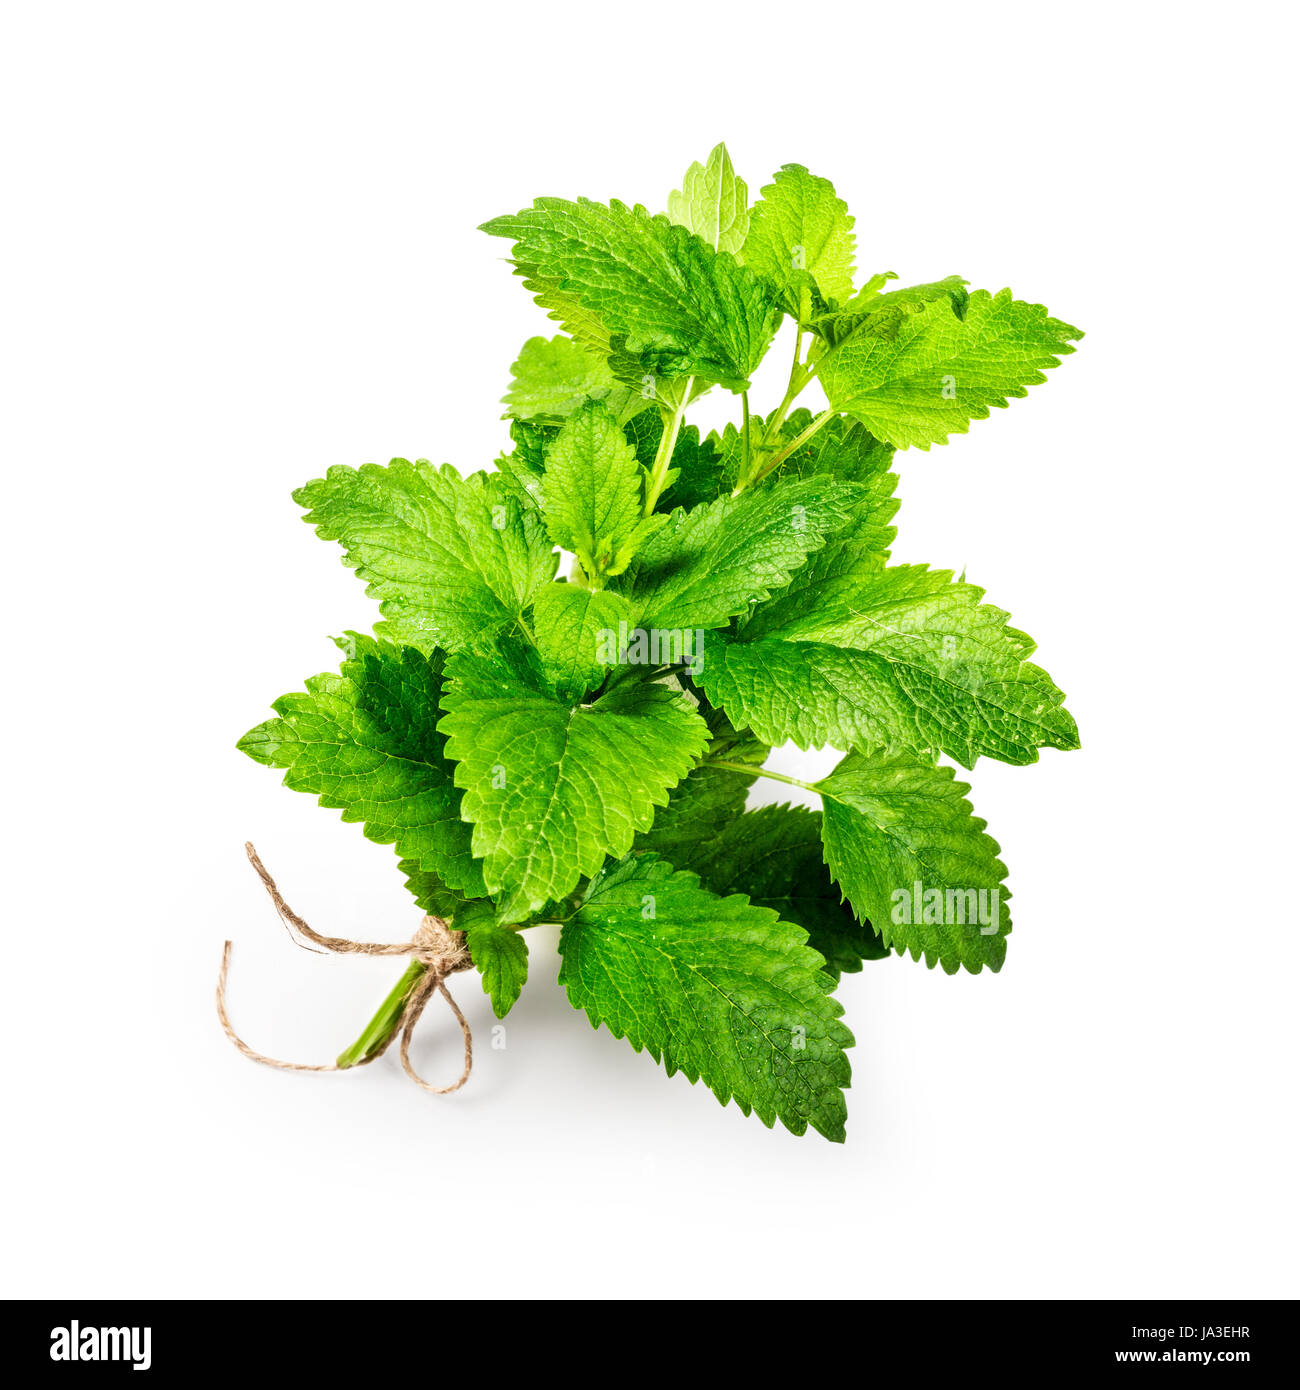 Lemon balm isolated on white background clipping path included. Fresh green melissa leaves with water drops Stock Photo